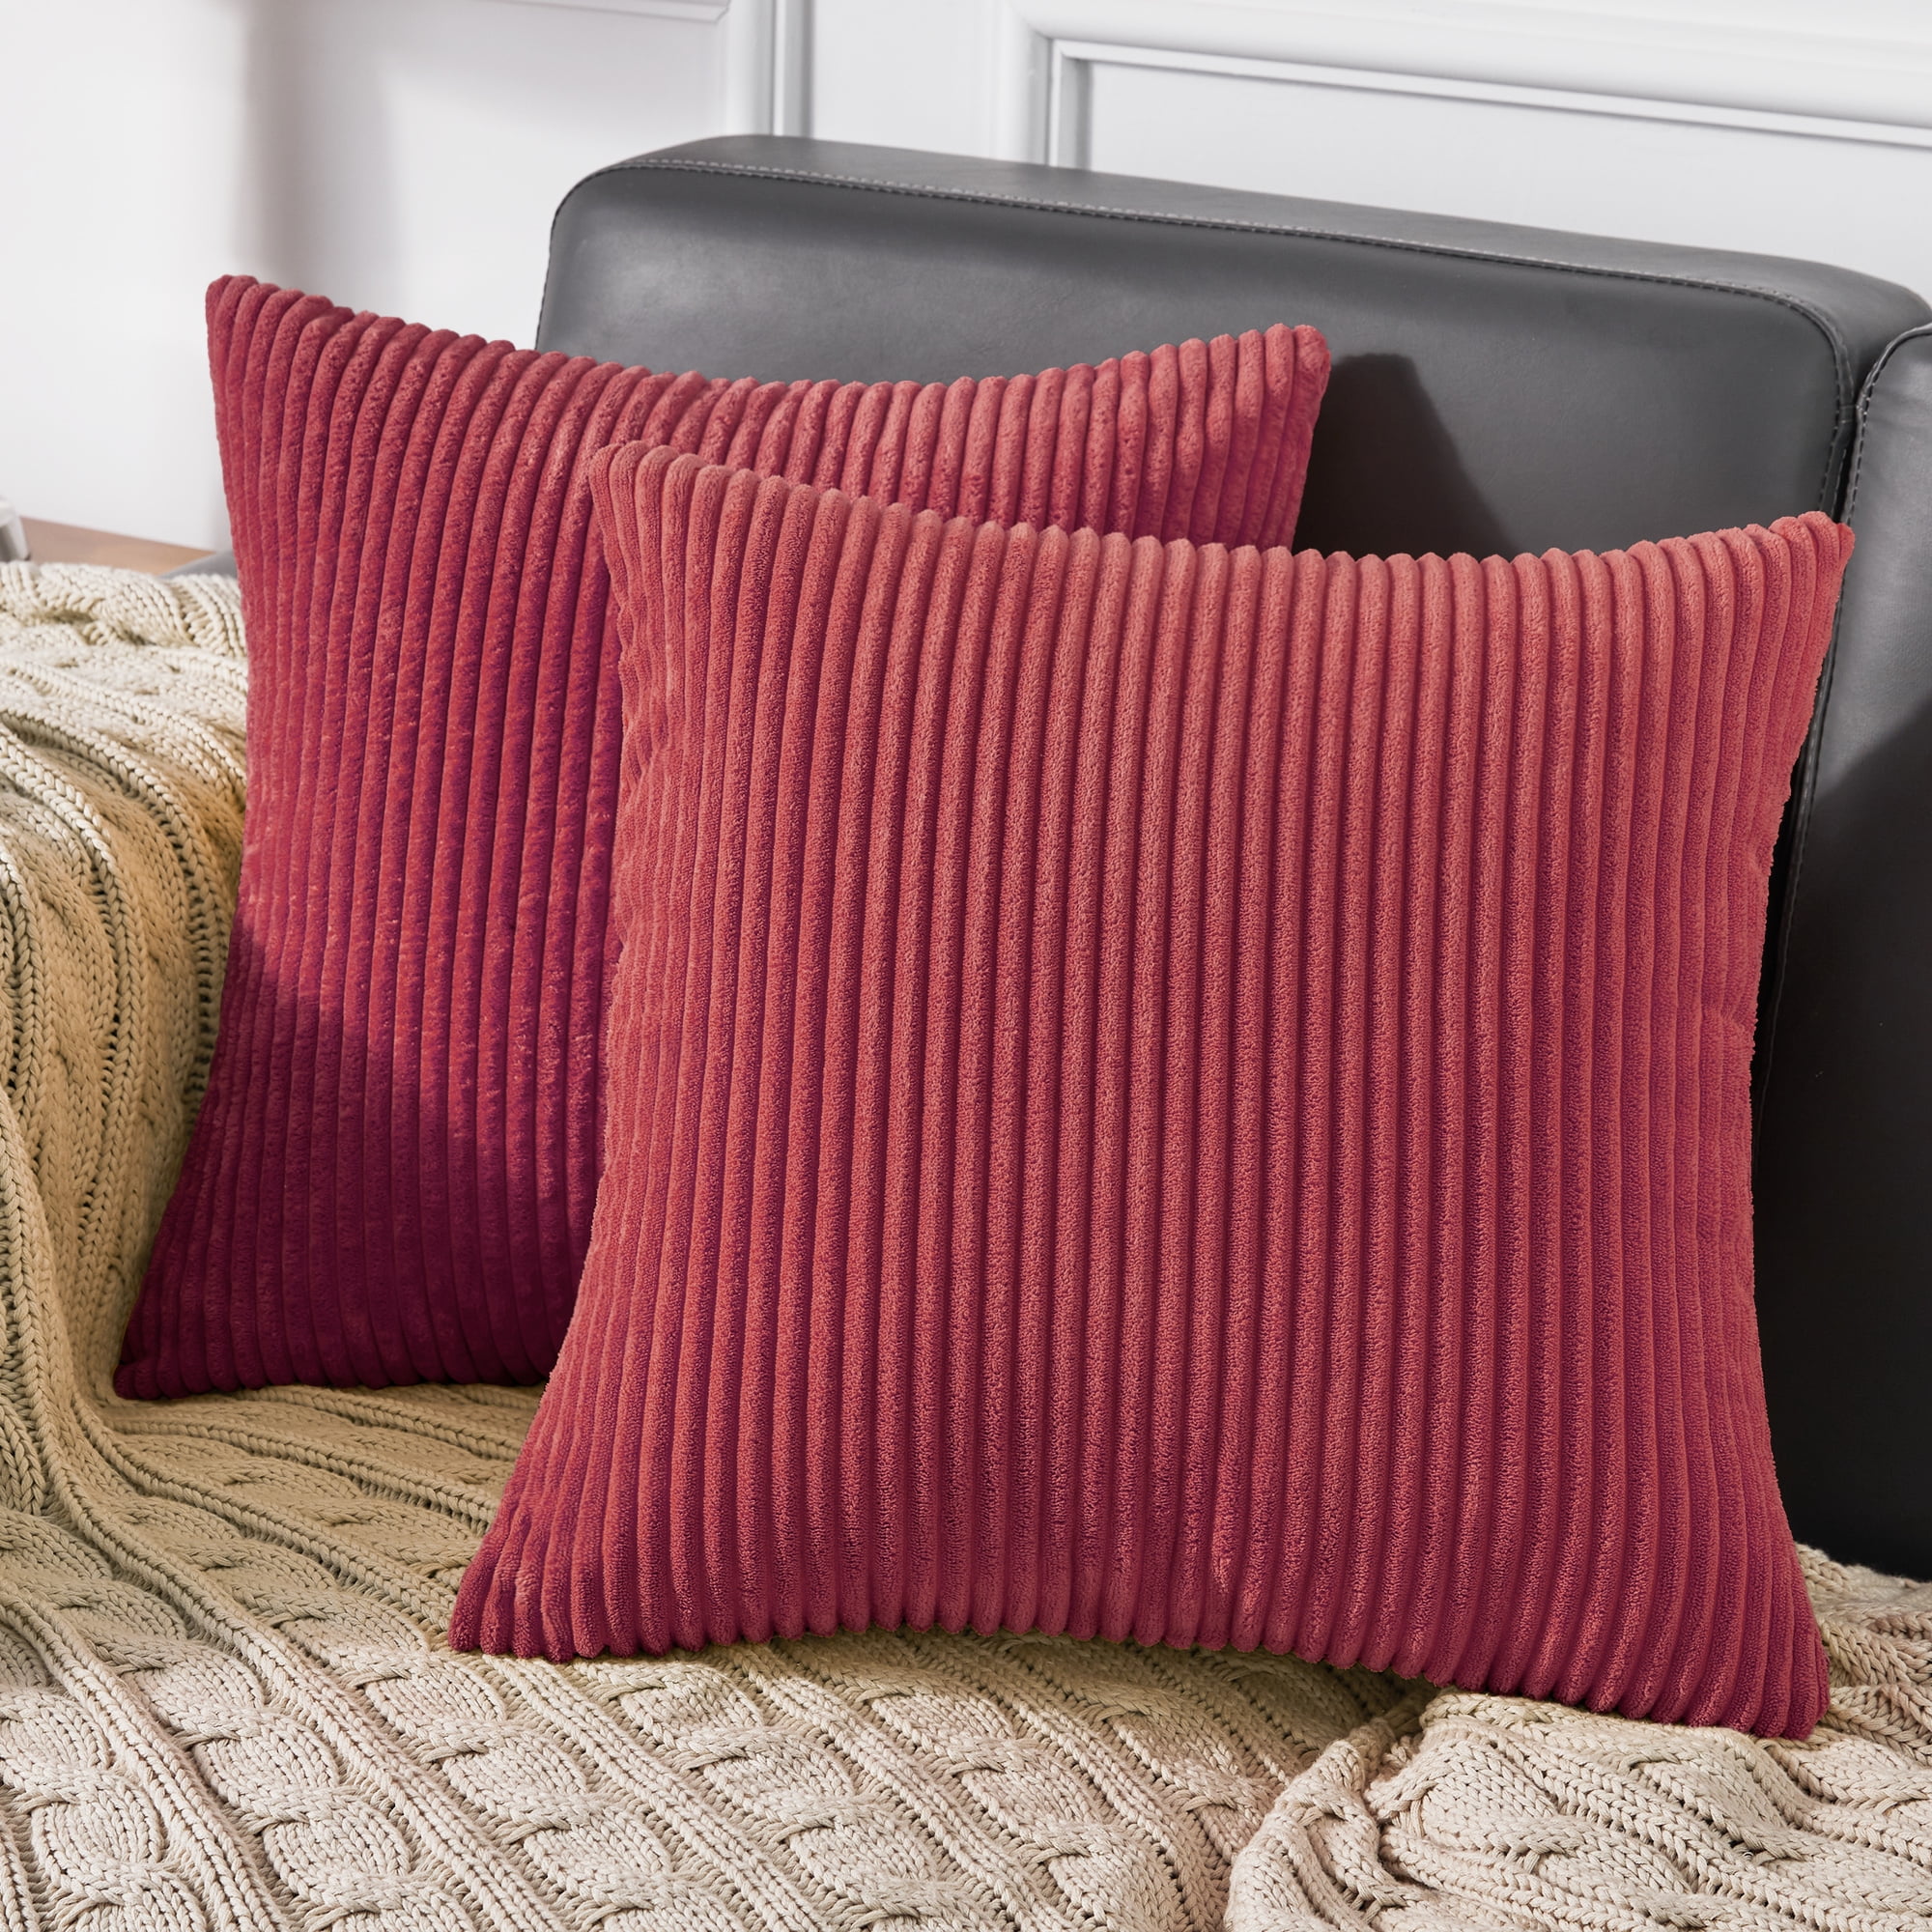 Deconovo Christmas Red Throw Pillow Cover Square Lumbar Pillow Covers Pack of 2 Corduroy Pillowcases for Couch Sofa Bed 22X22 inch Dark Red, Size: 22